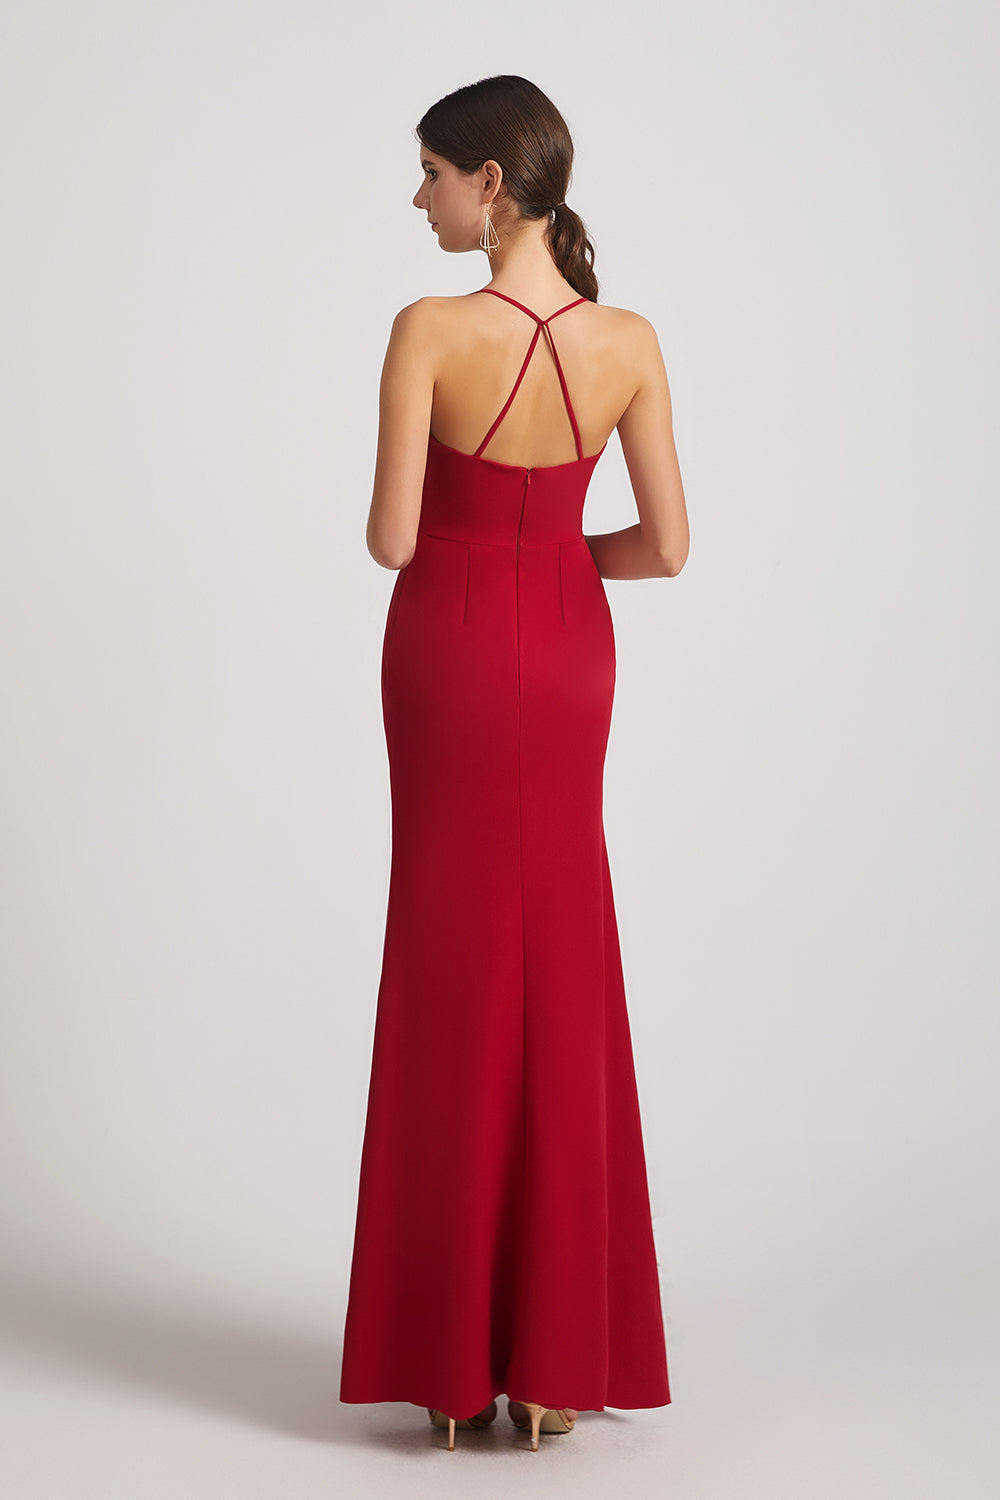 open back red maxi dresses